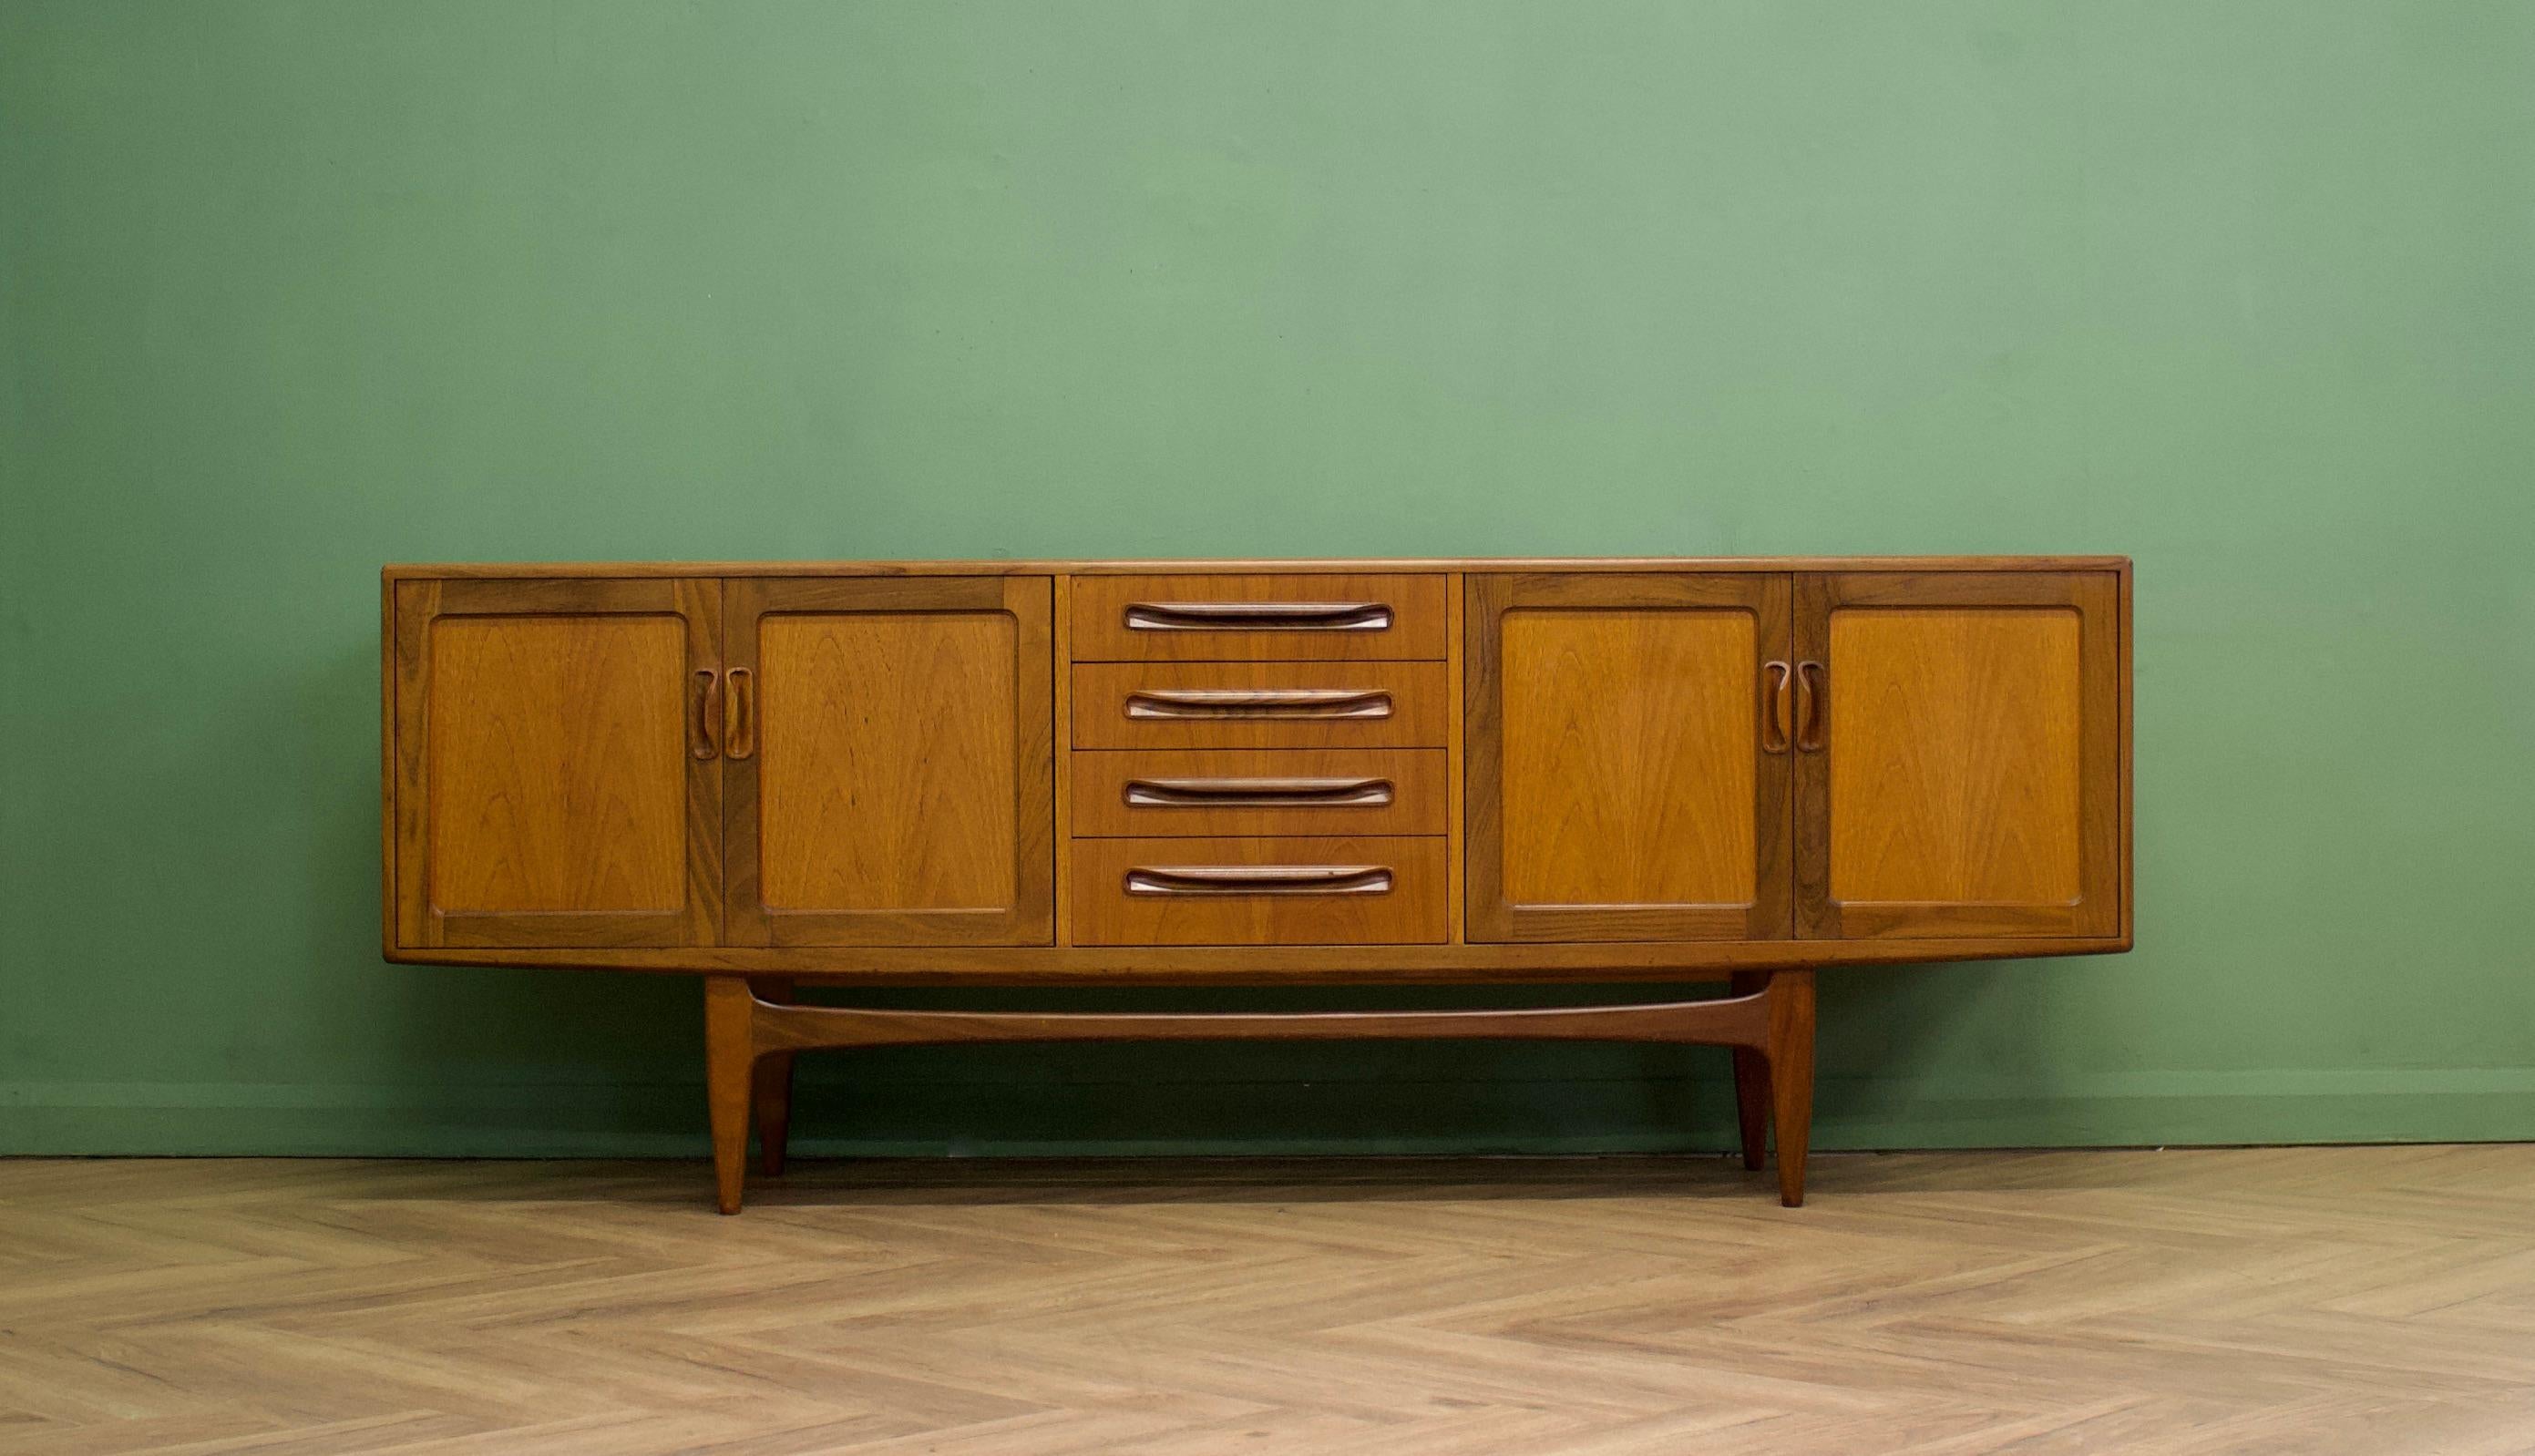 - A mid century Fresco teak sideboard from G Plan
- Featuring two cupboards with removable and adjustable selves - and four drawers